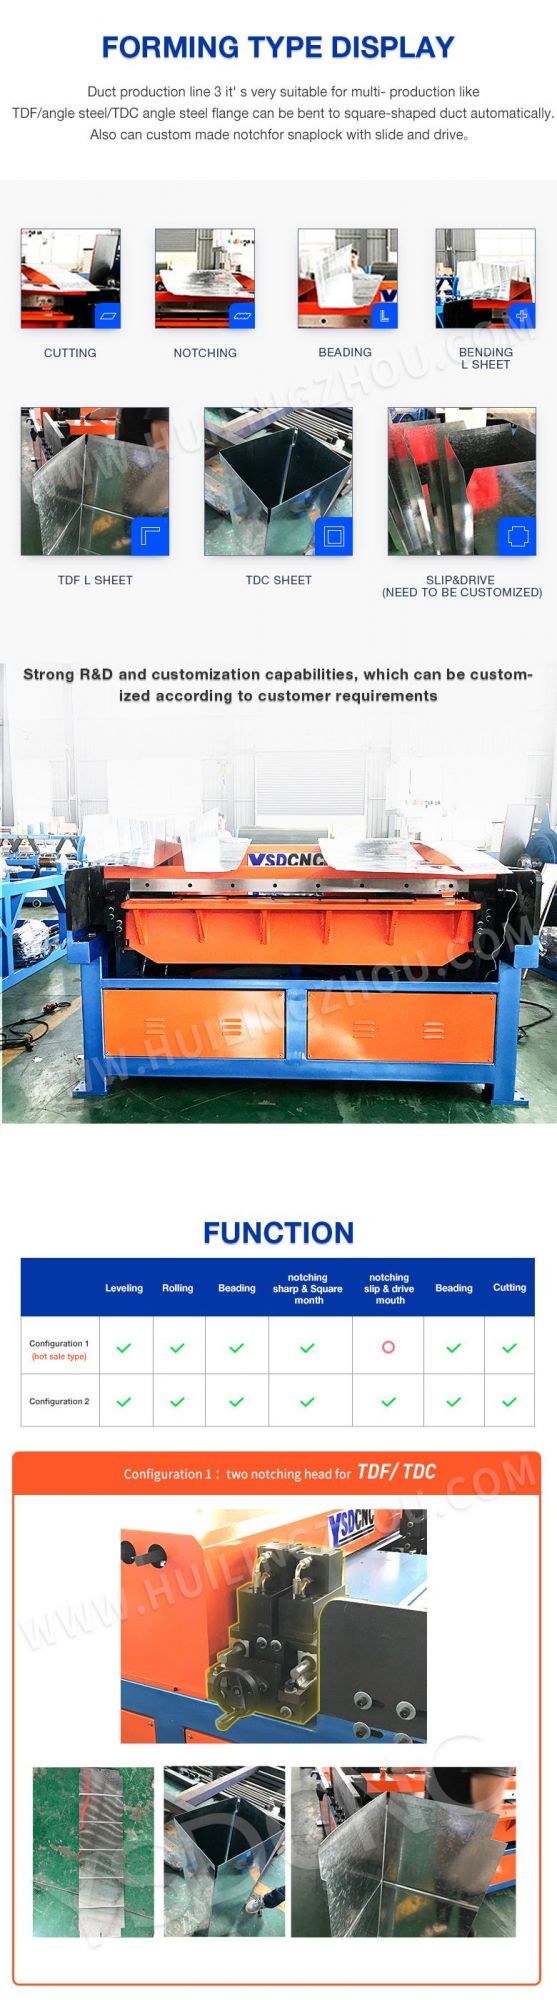 Instock Duct Manufacture Auto Line III / HVAC Rectangular Air Duct Production Line/Duct Production Line